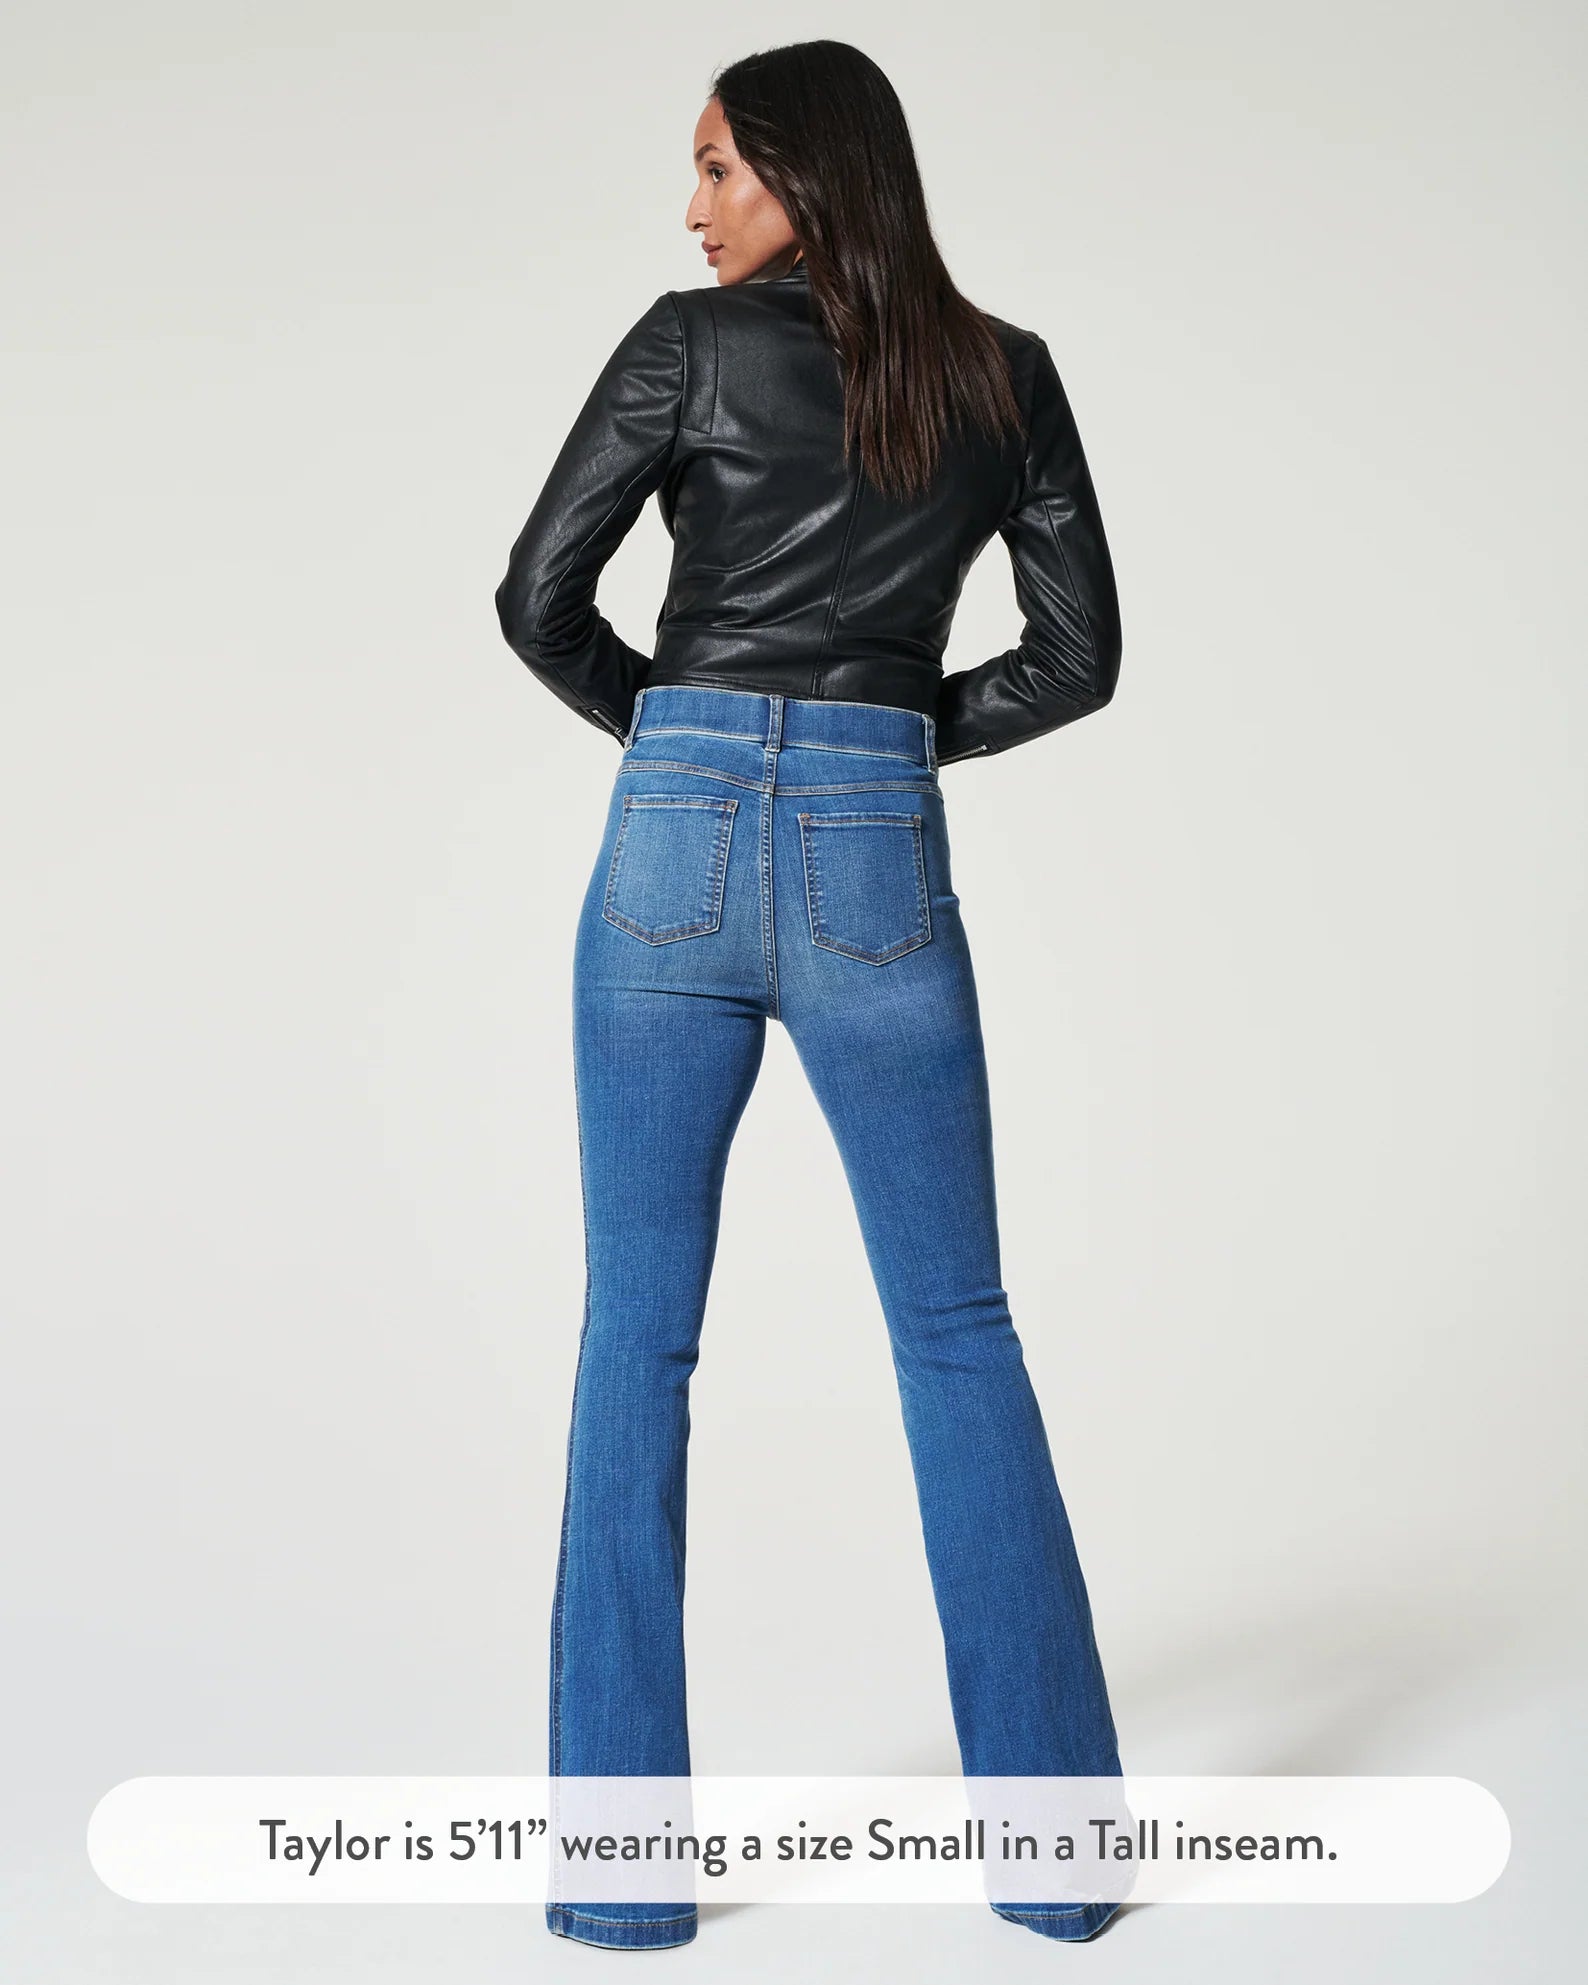 Spanx Flare Jeans